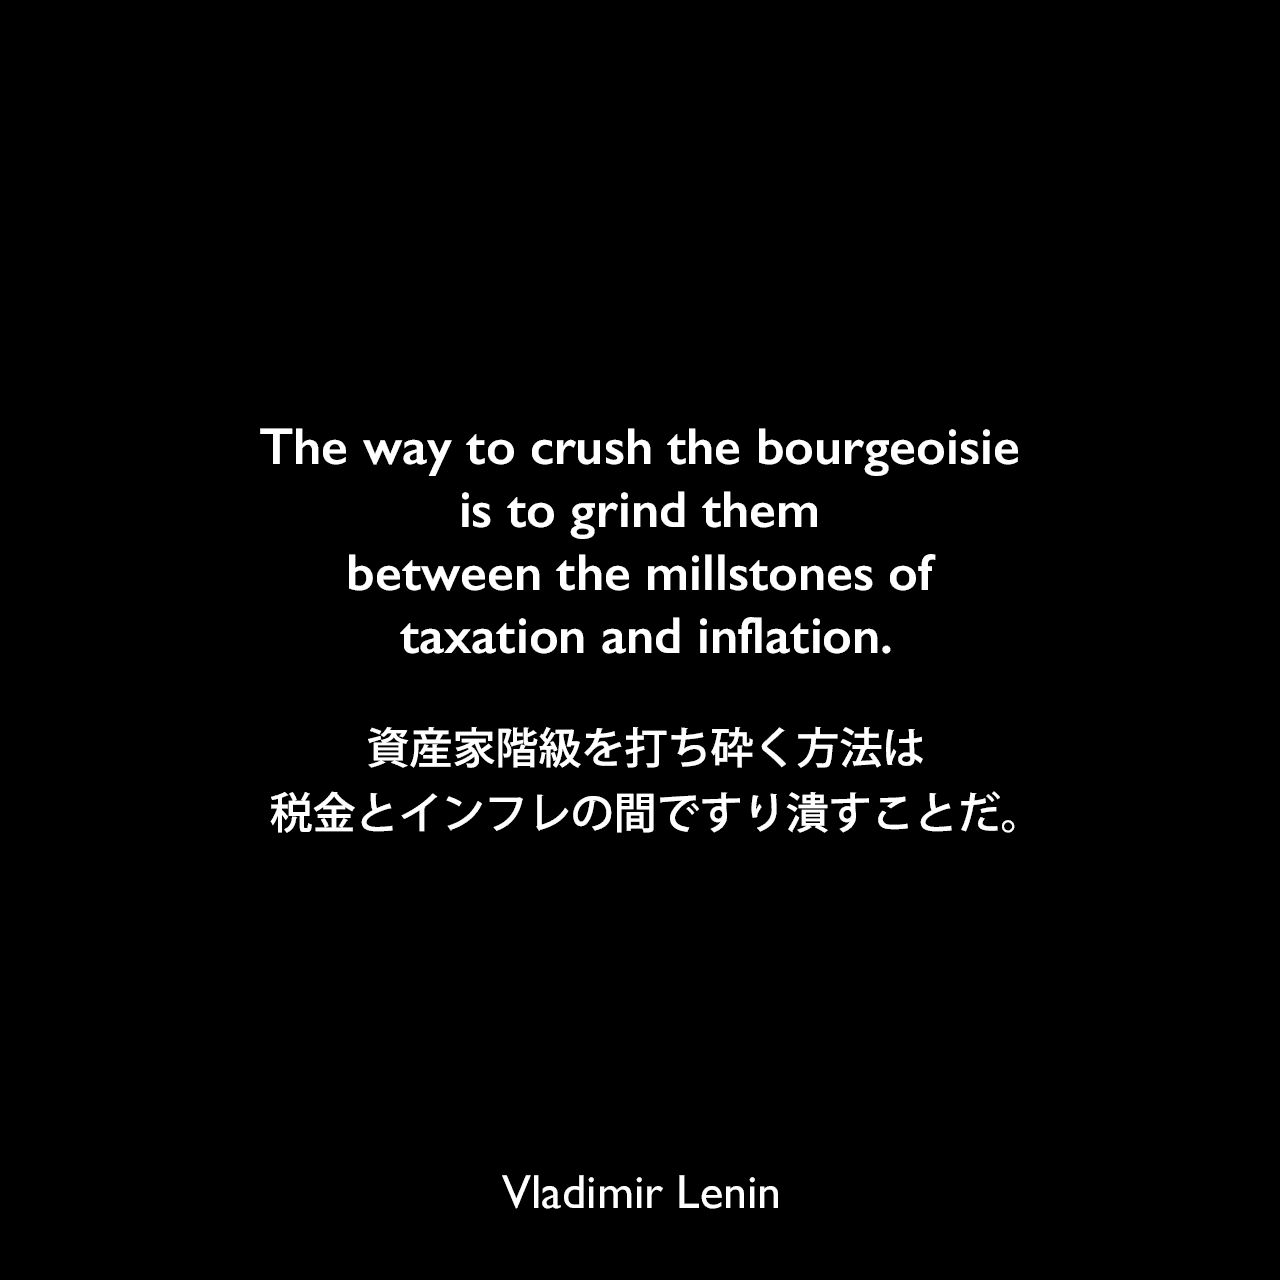 The way to crush the bourgeoisie is to grind them between the millstones of taxation and inflation.資産家階級を打ち砕く方法は、税金とインフレの間ですり潰すことだ。Vladimir Lenin